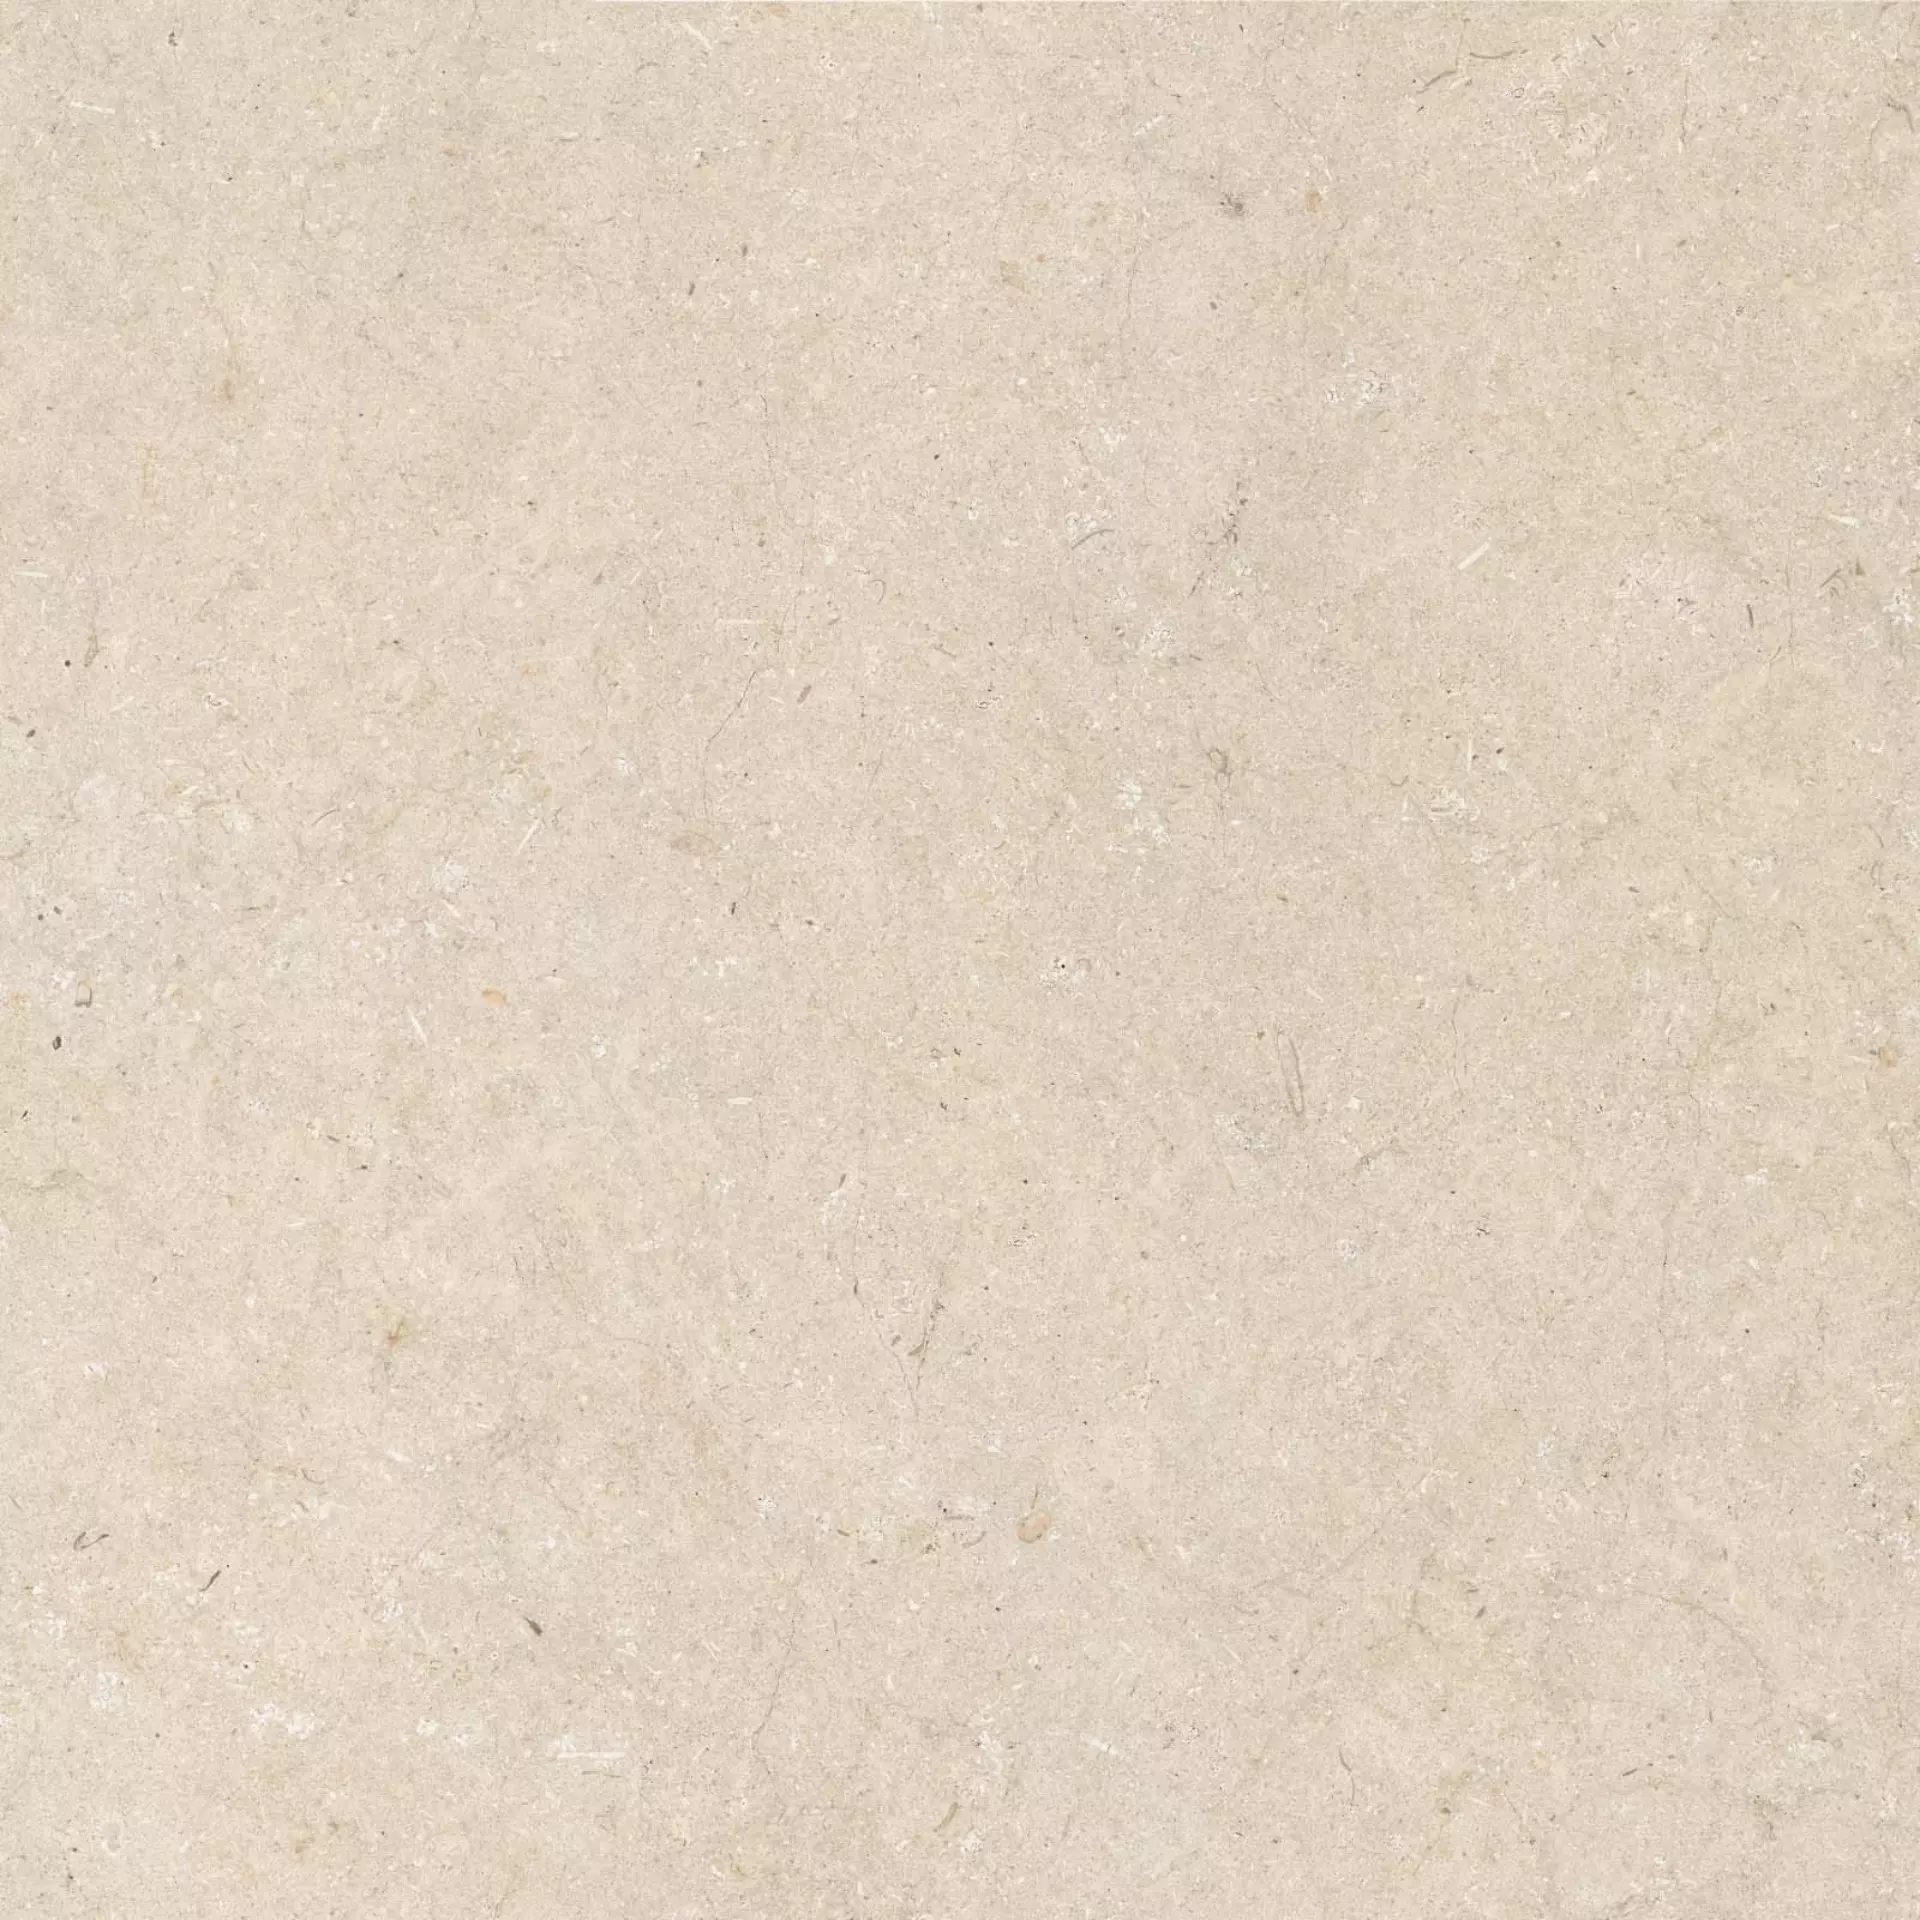 ABK Poetry Stone Trani Beige Naturale PF60010536 120x120cm rectified 8,5mm